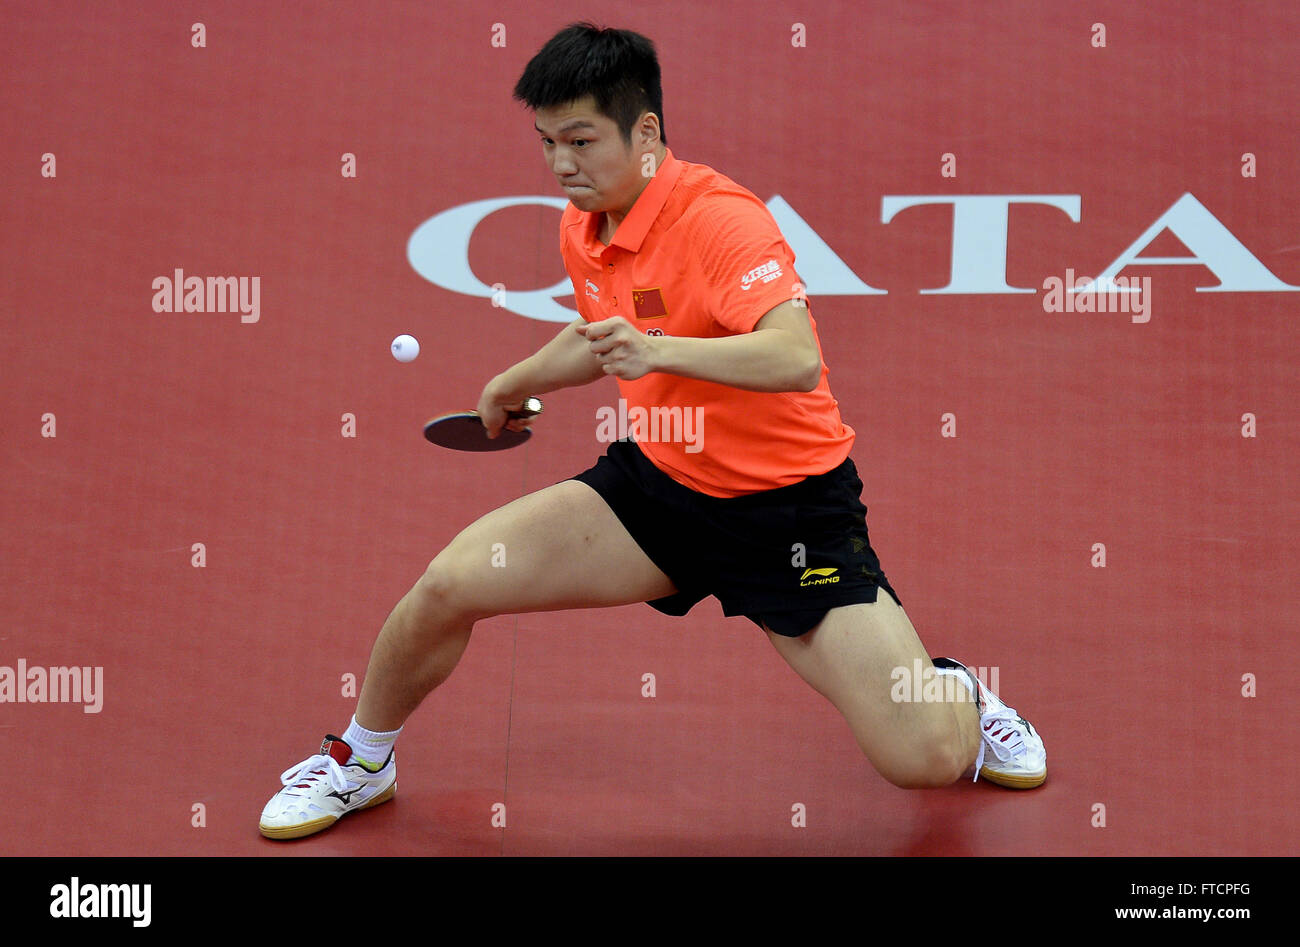 Doha Qatar 27th Mar 2016 Fan Zhendong Of China Competes During The Final Of Men S Singles Against Ma Long Of China At The 2016 Ittf World Tour Qatar Open Table Tennis Tournament